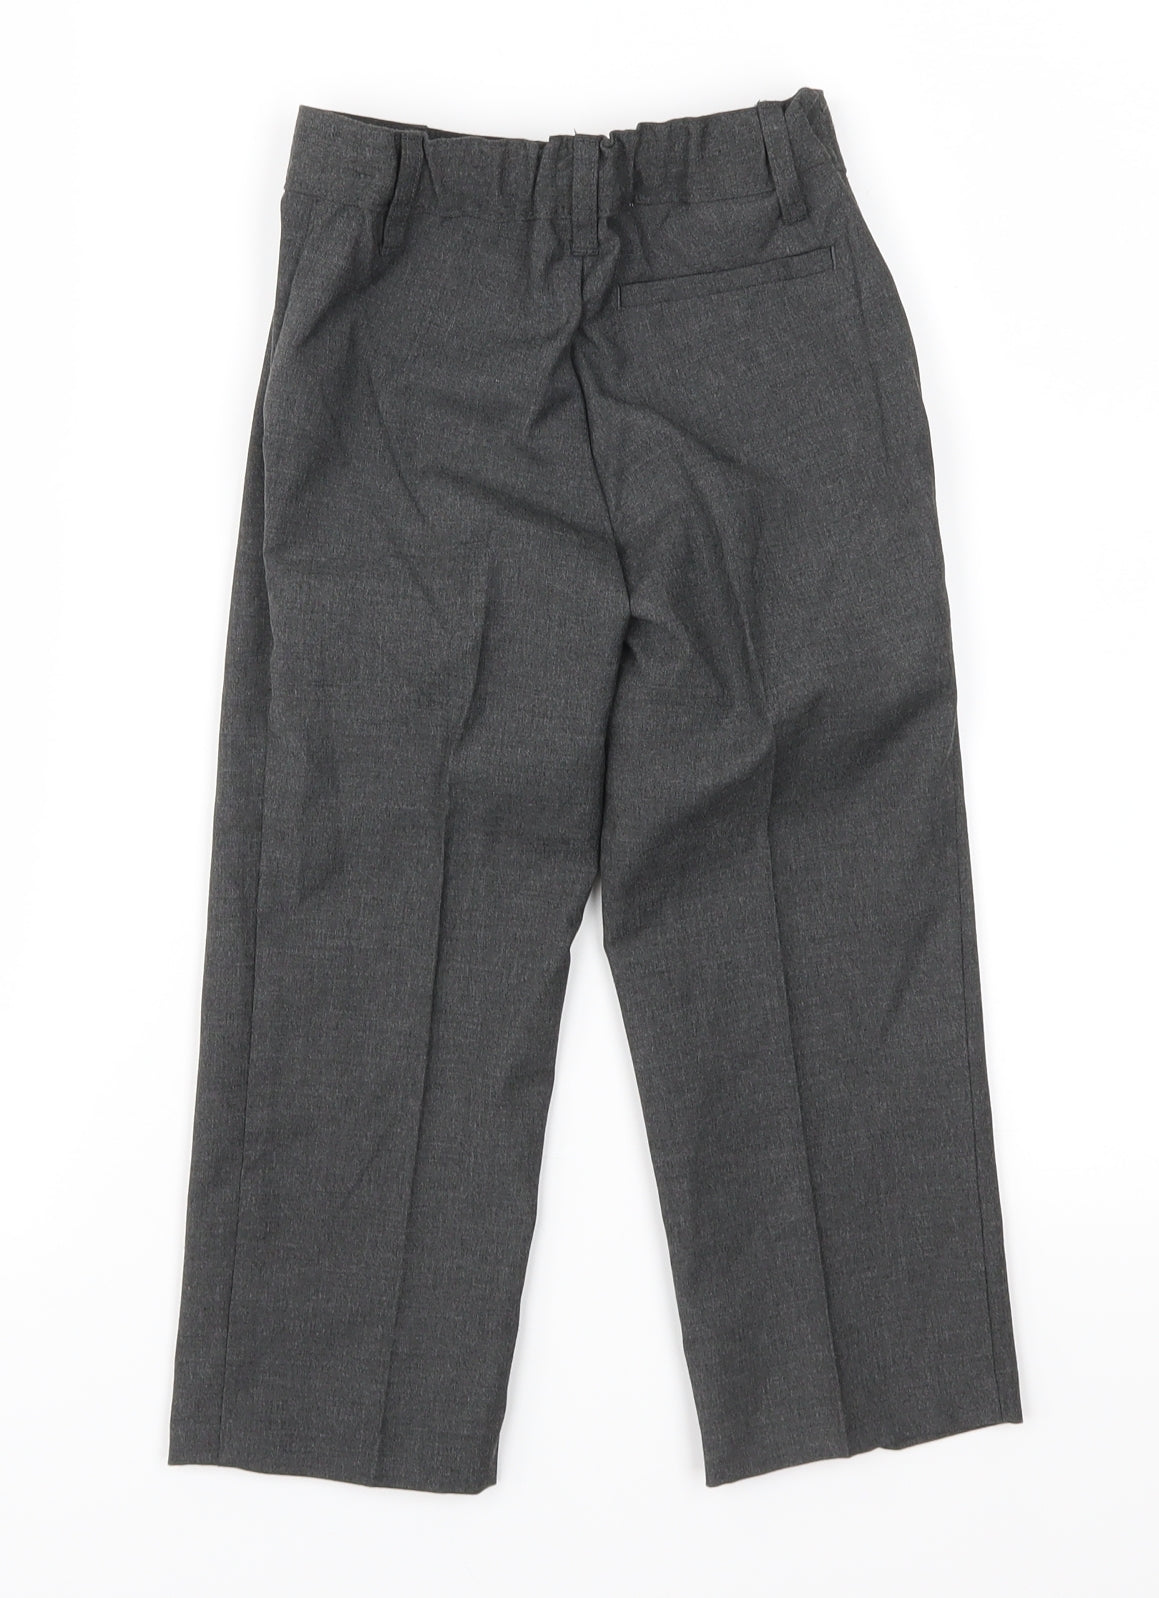 Marks and Spencer Boys Grey   Dress Pants Trousers Size 2-3 Years